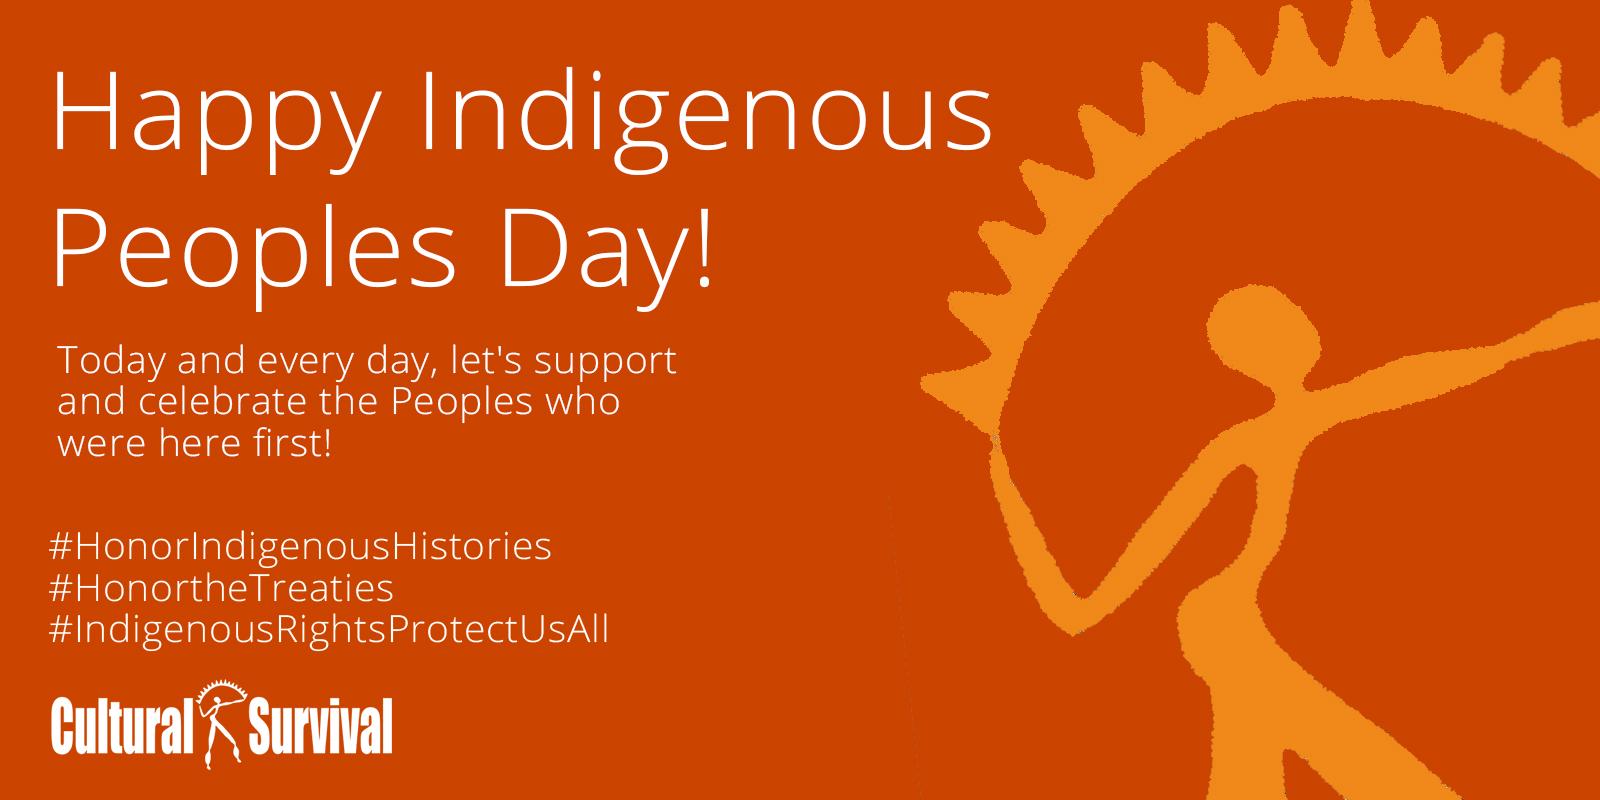 11 Things to Do on Indigenous Peoples Day! Cultural Survival